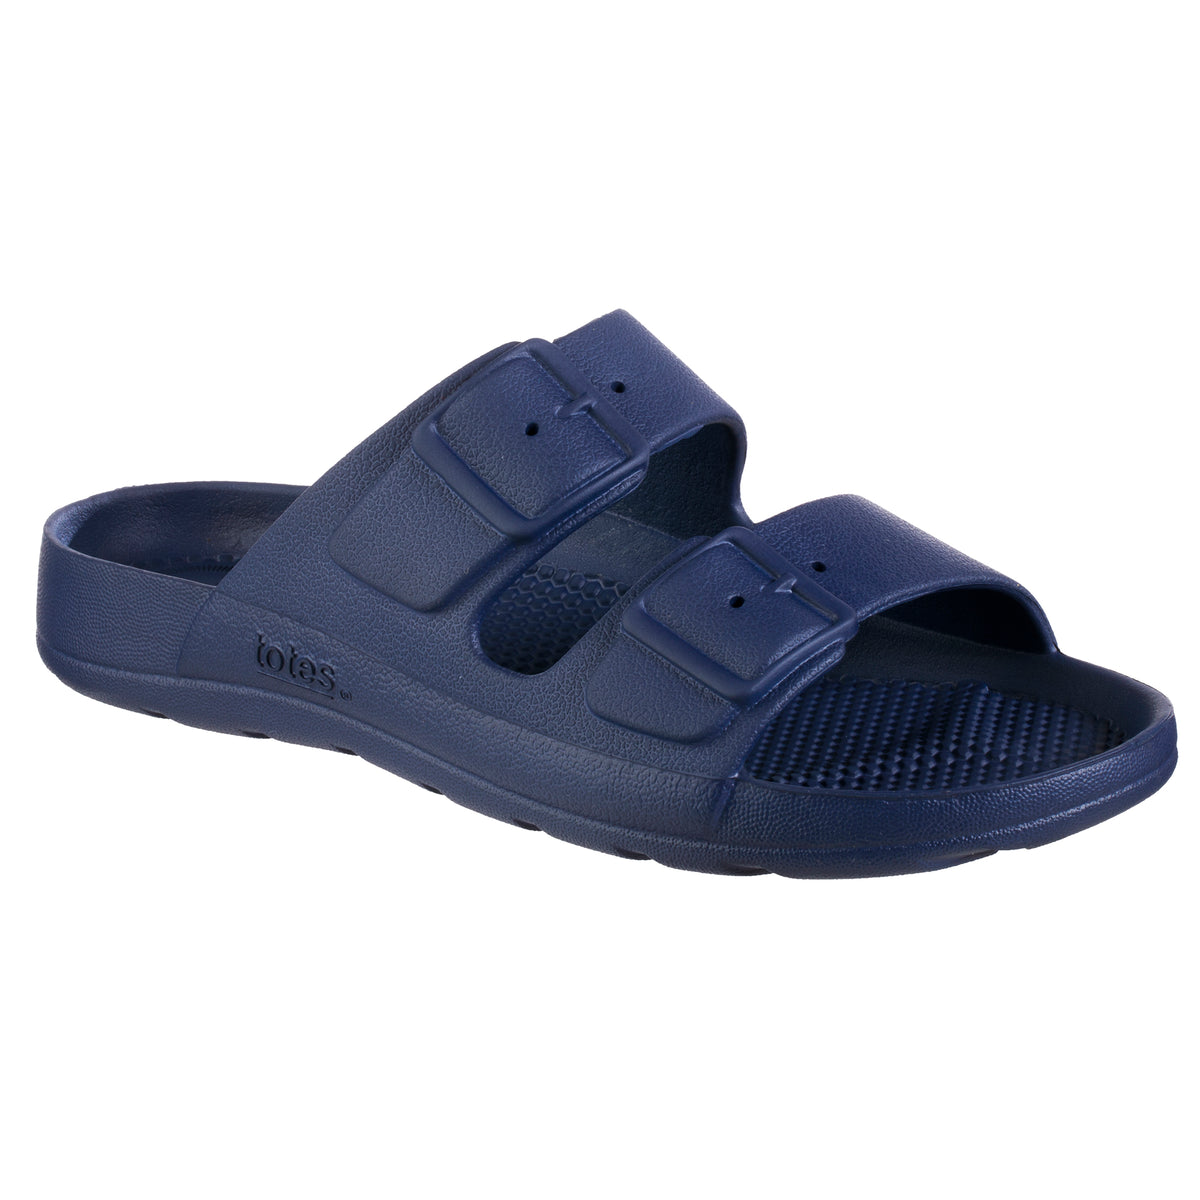 Totes Women's Sol Bounce Molded Buckle Slide